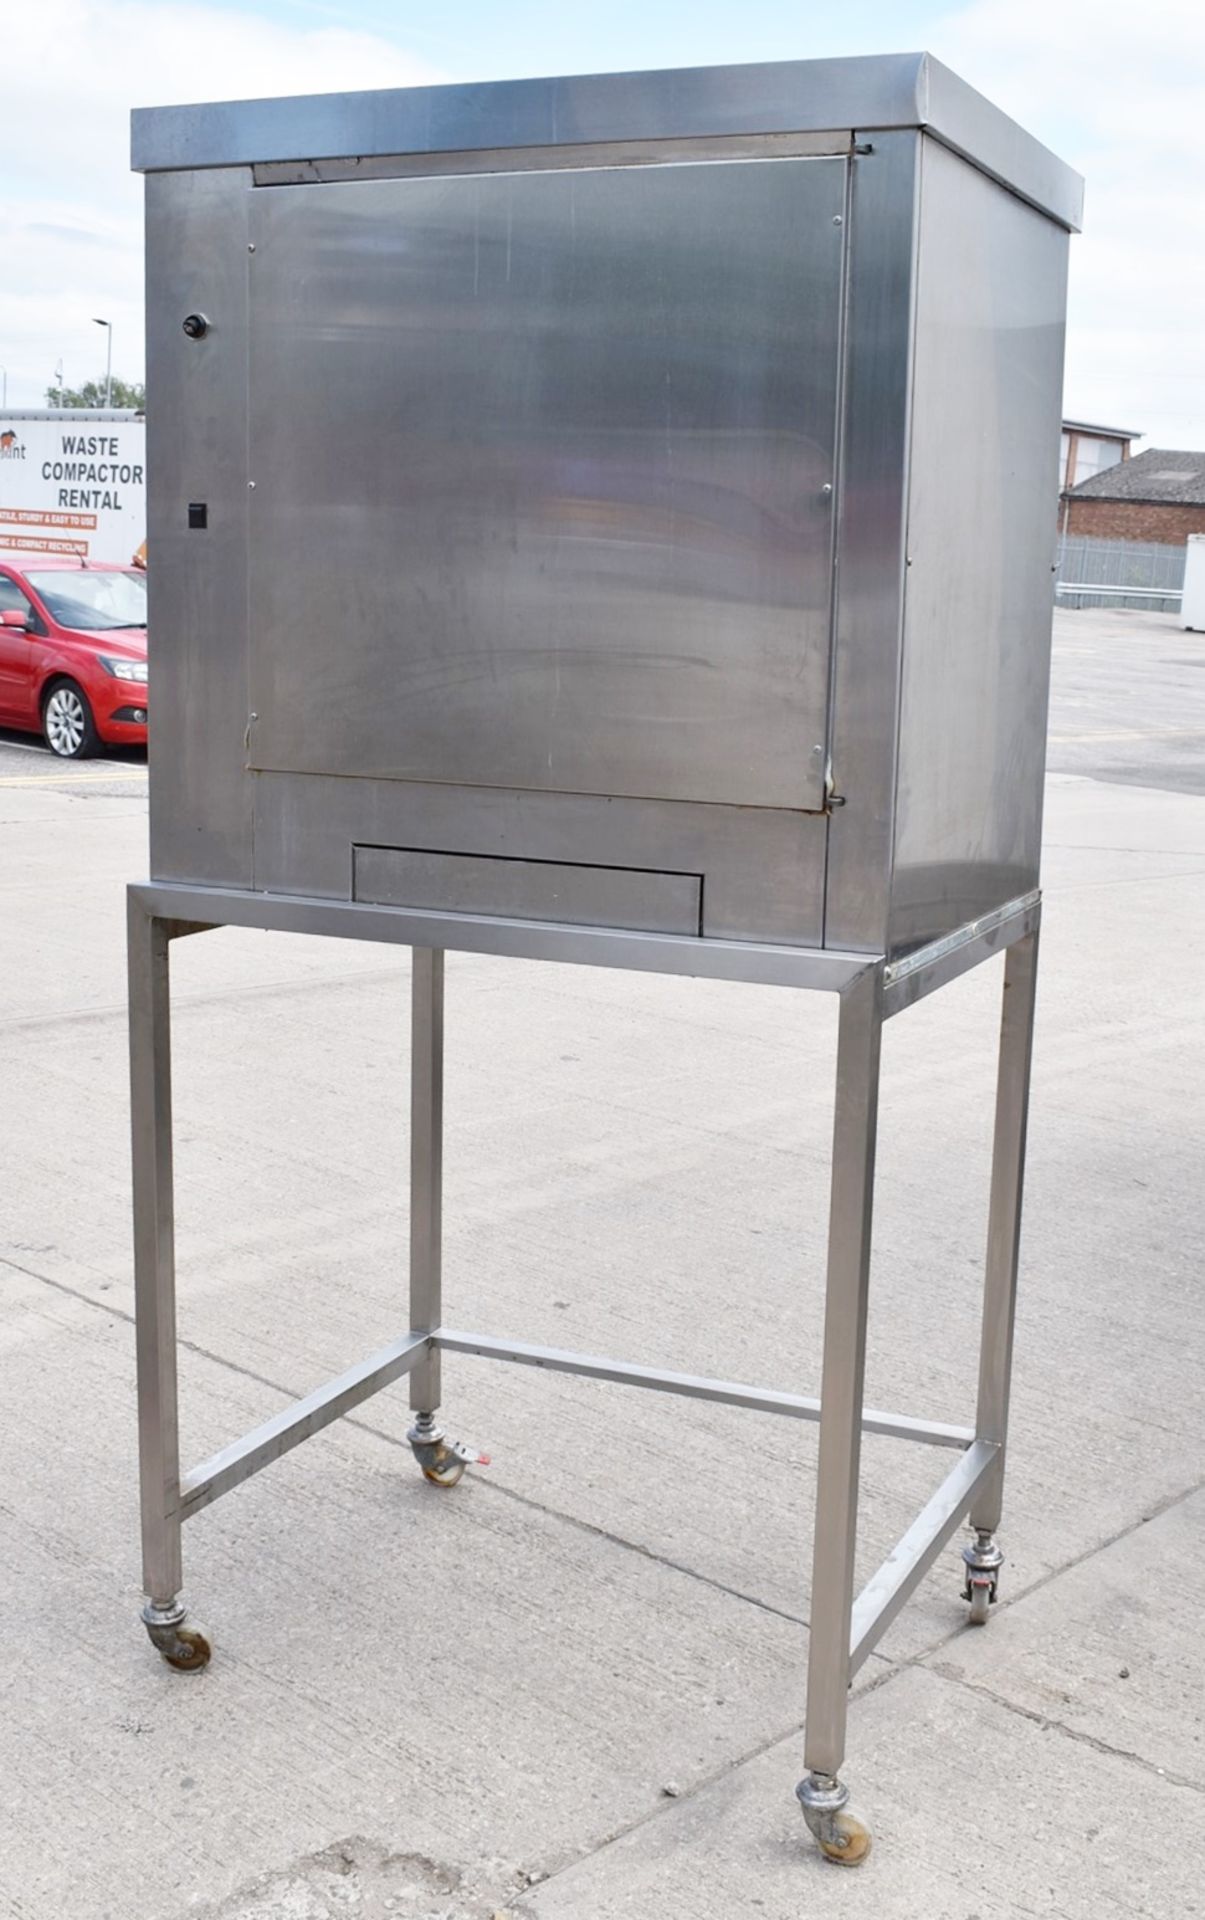 1 x BKI BBQ King Commercial Rotisserie Chicken Oven With Stand - Cooks Upto 40 Chickens - 3 Phase - Image 5 of 8